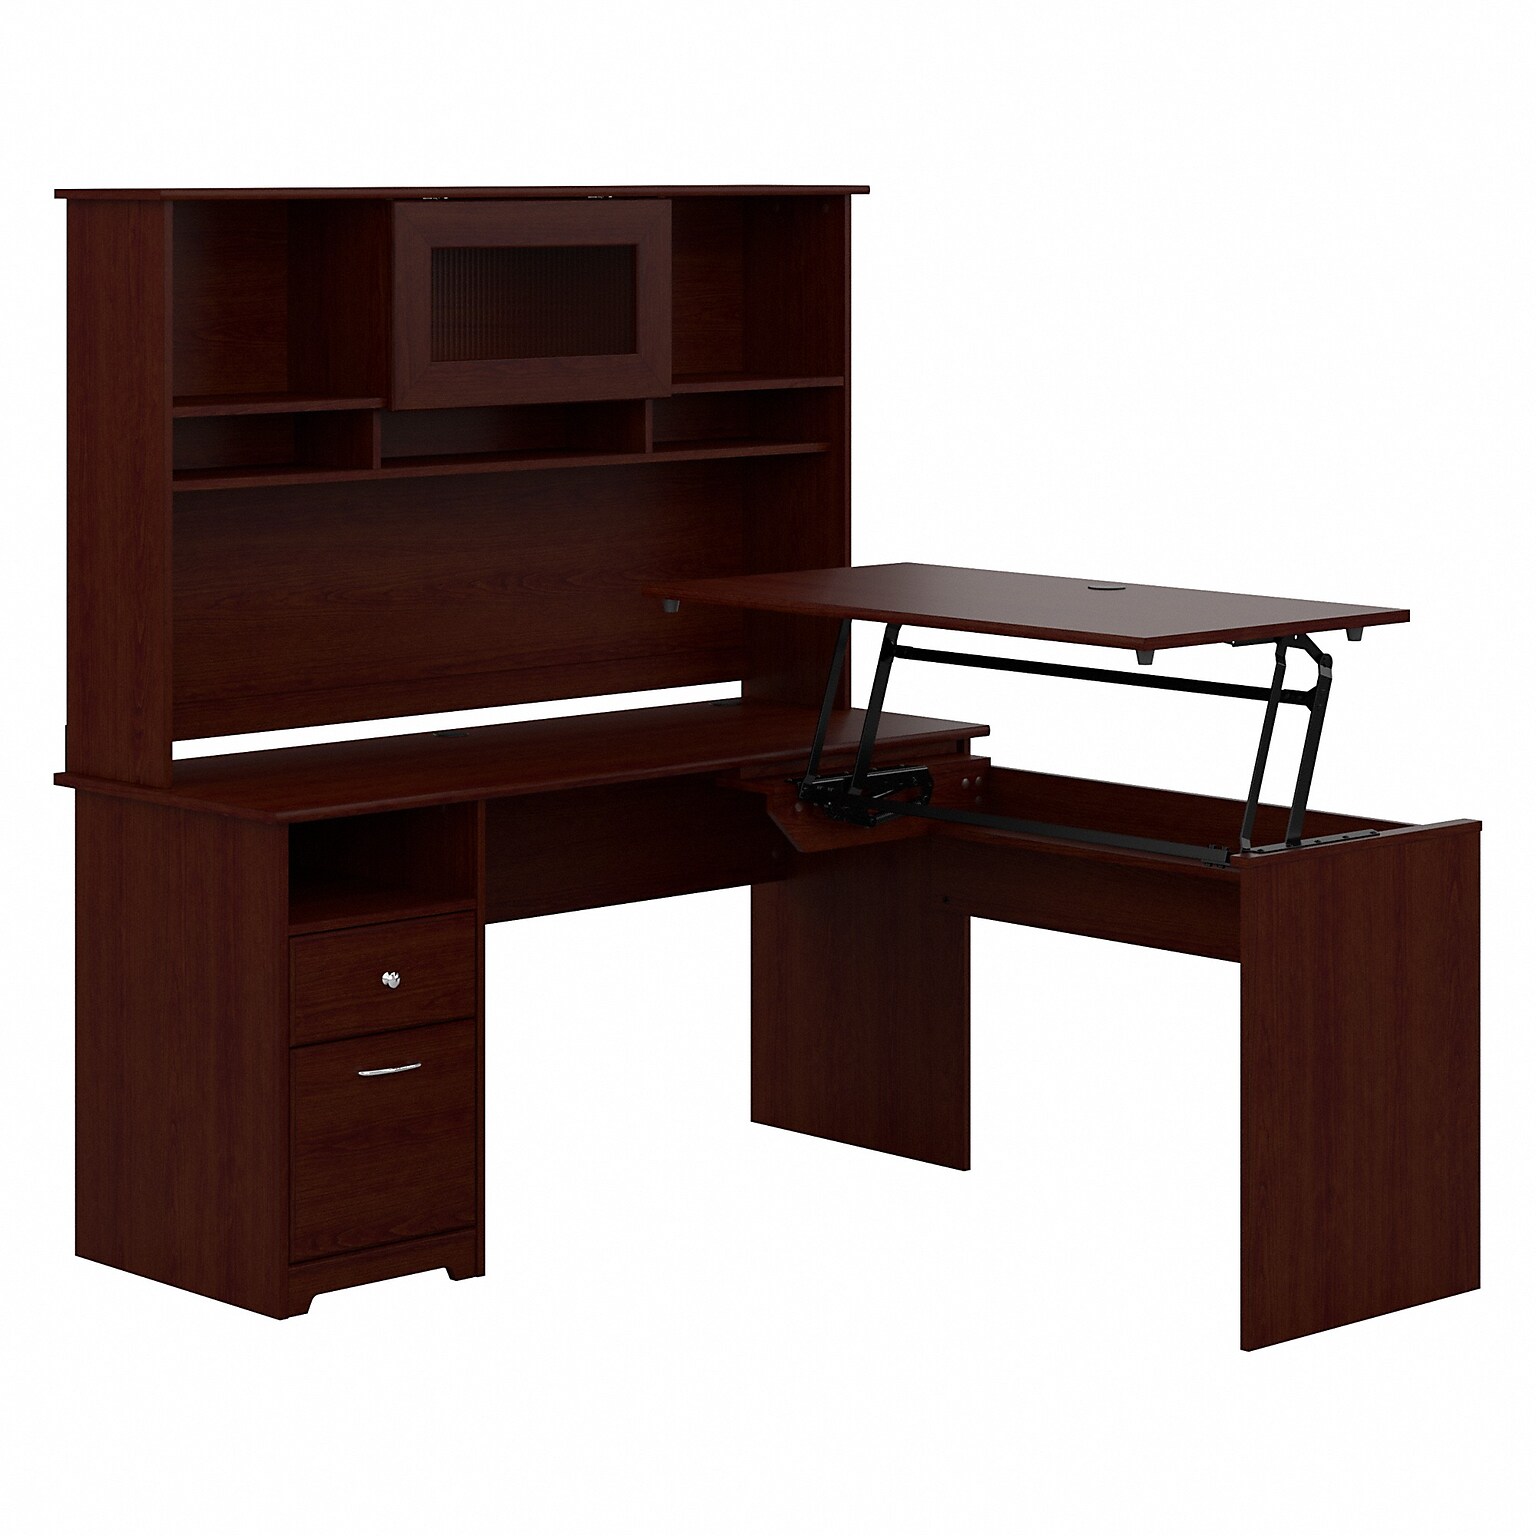 Bush Furniture Cabot 60W 3 Position L Shaped Sit to Stand Desk with Hutch, Harvest Cherry (CAB045HVC)